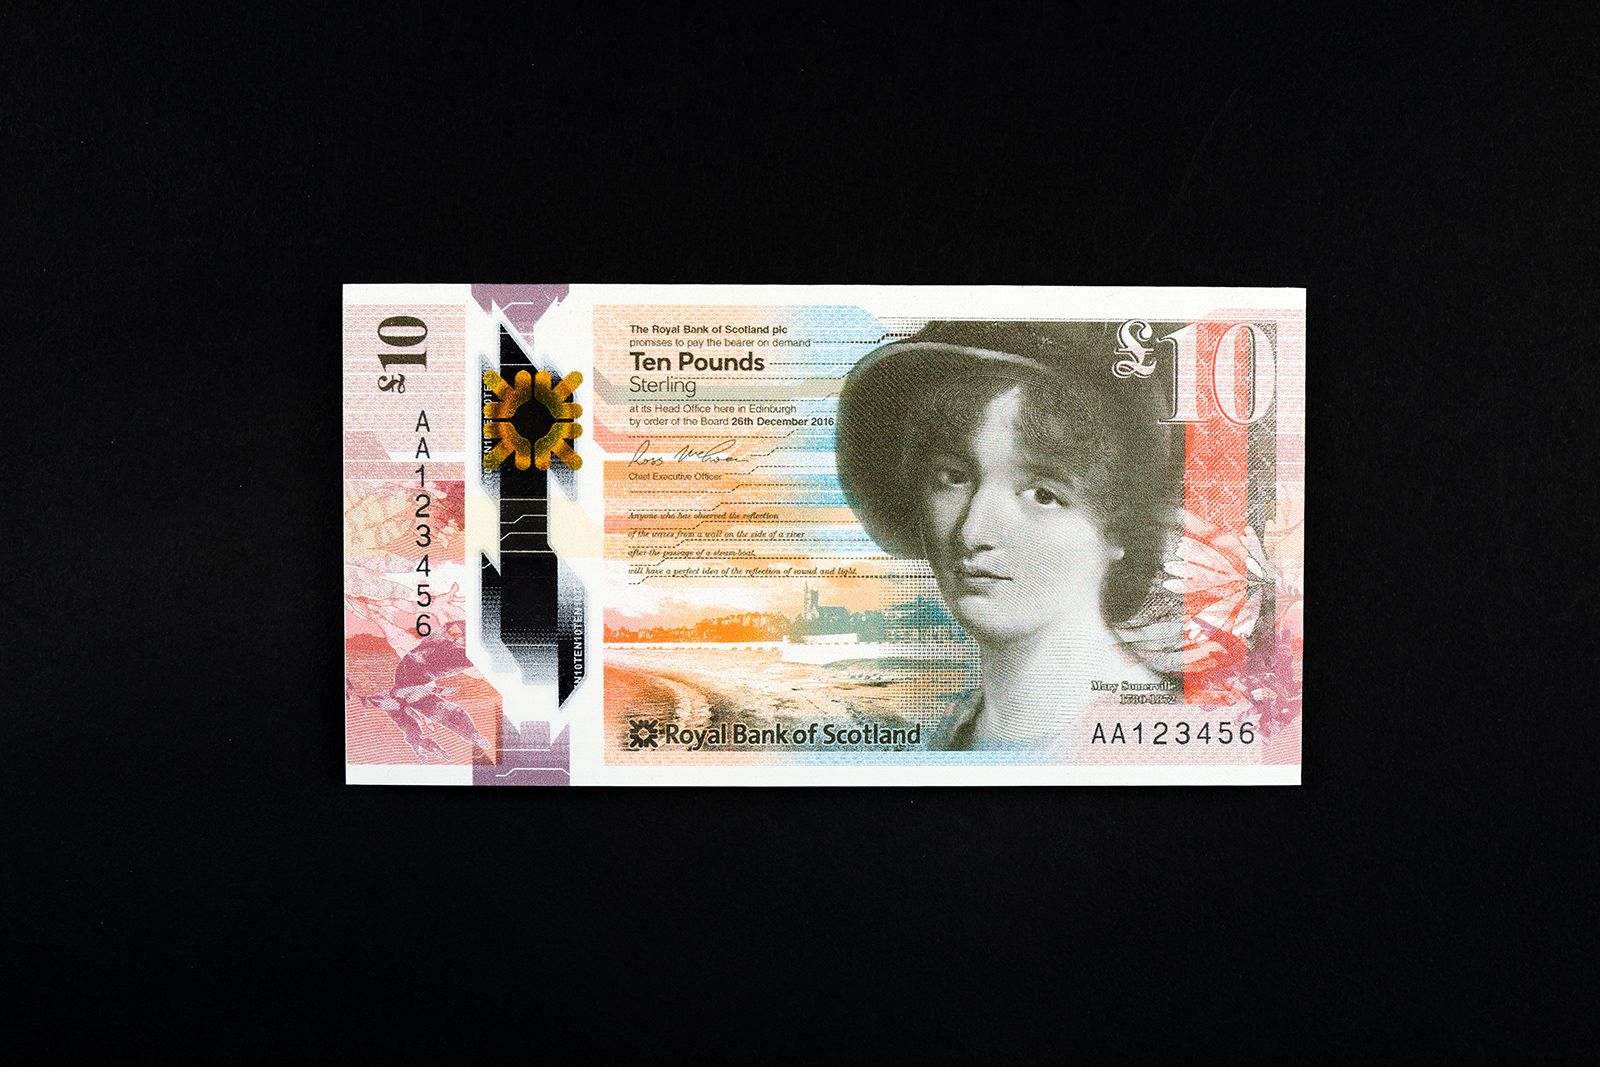 Royal Bank of Scotland polymer £10 banknote featuring Mary Somerville. Currency design by Scottish design agency, O Street.